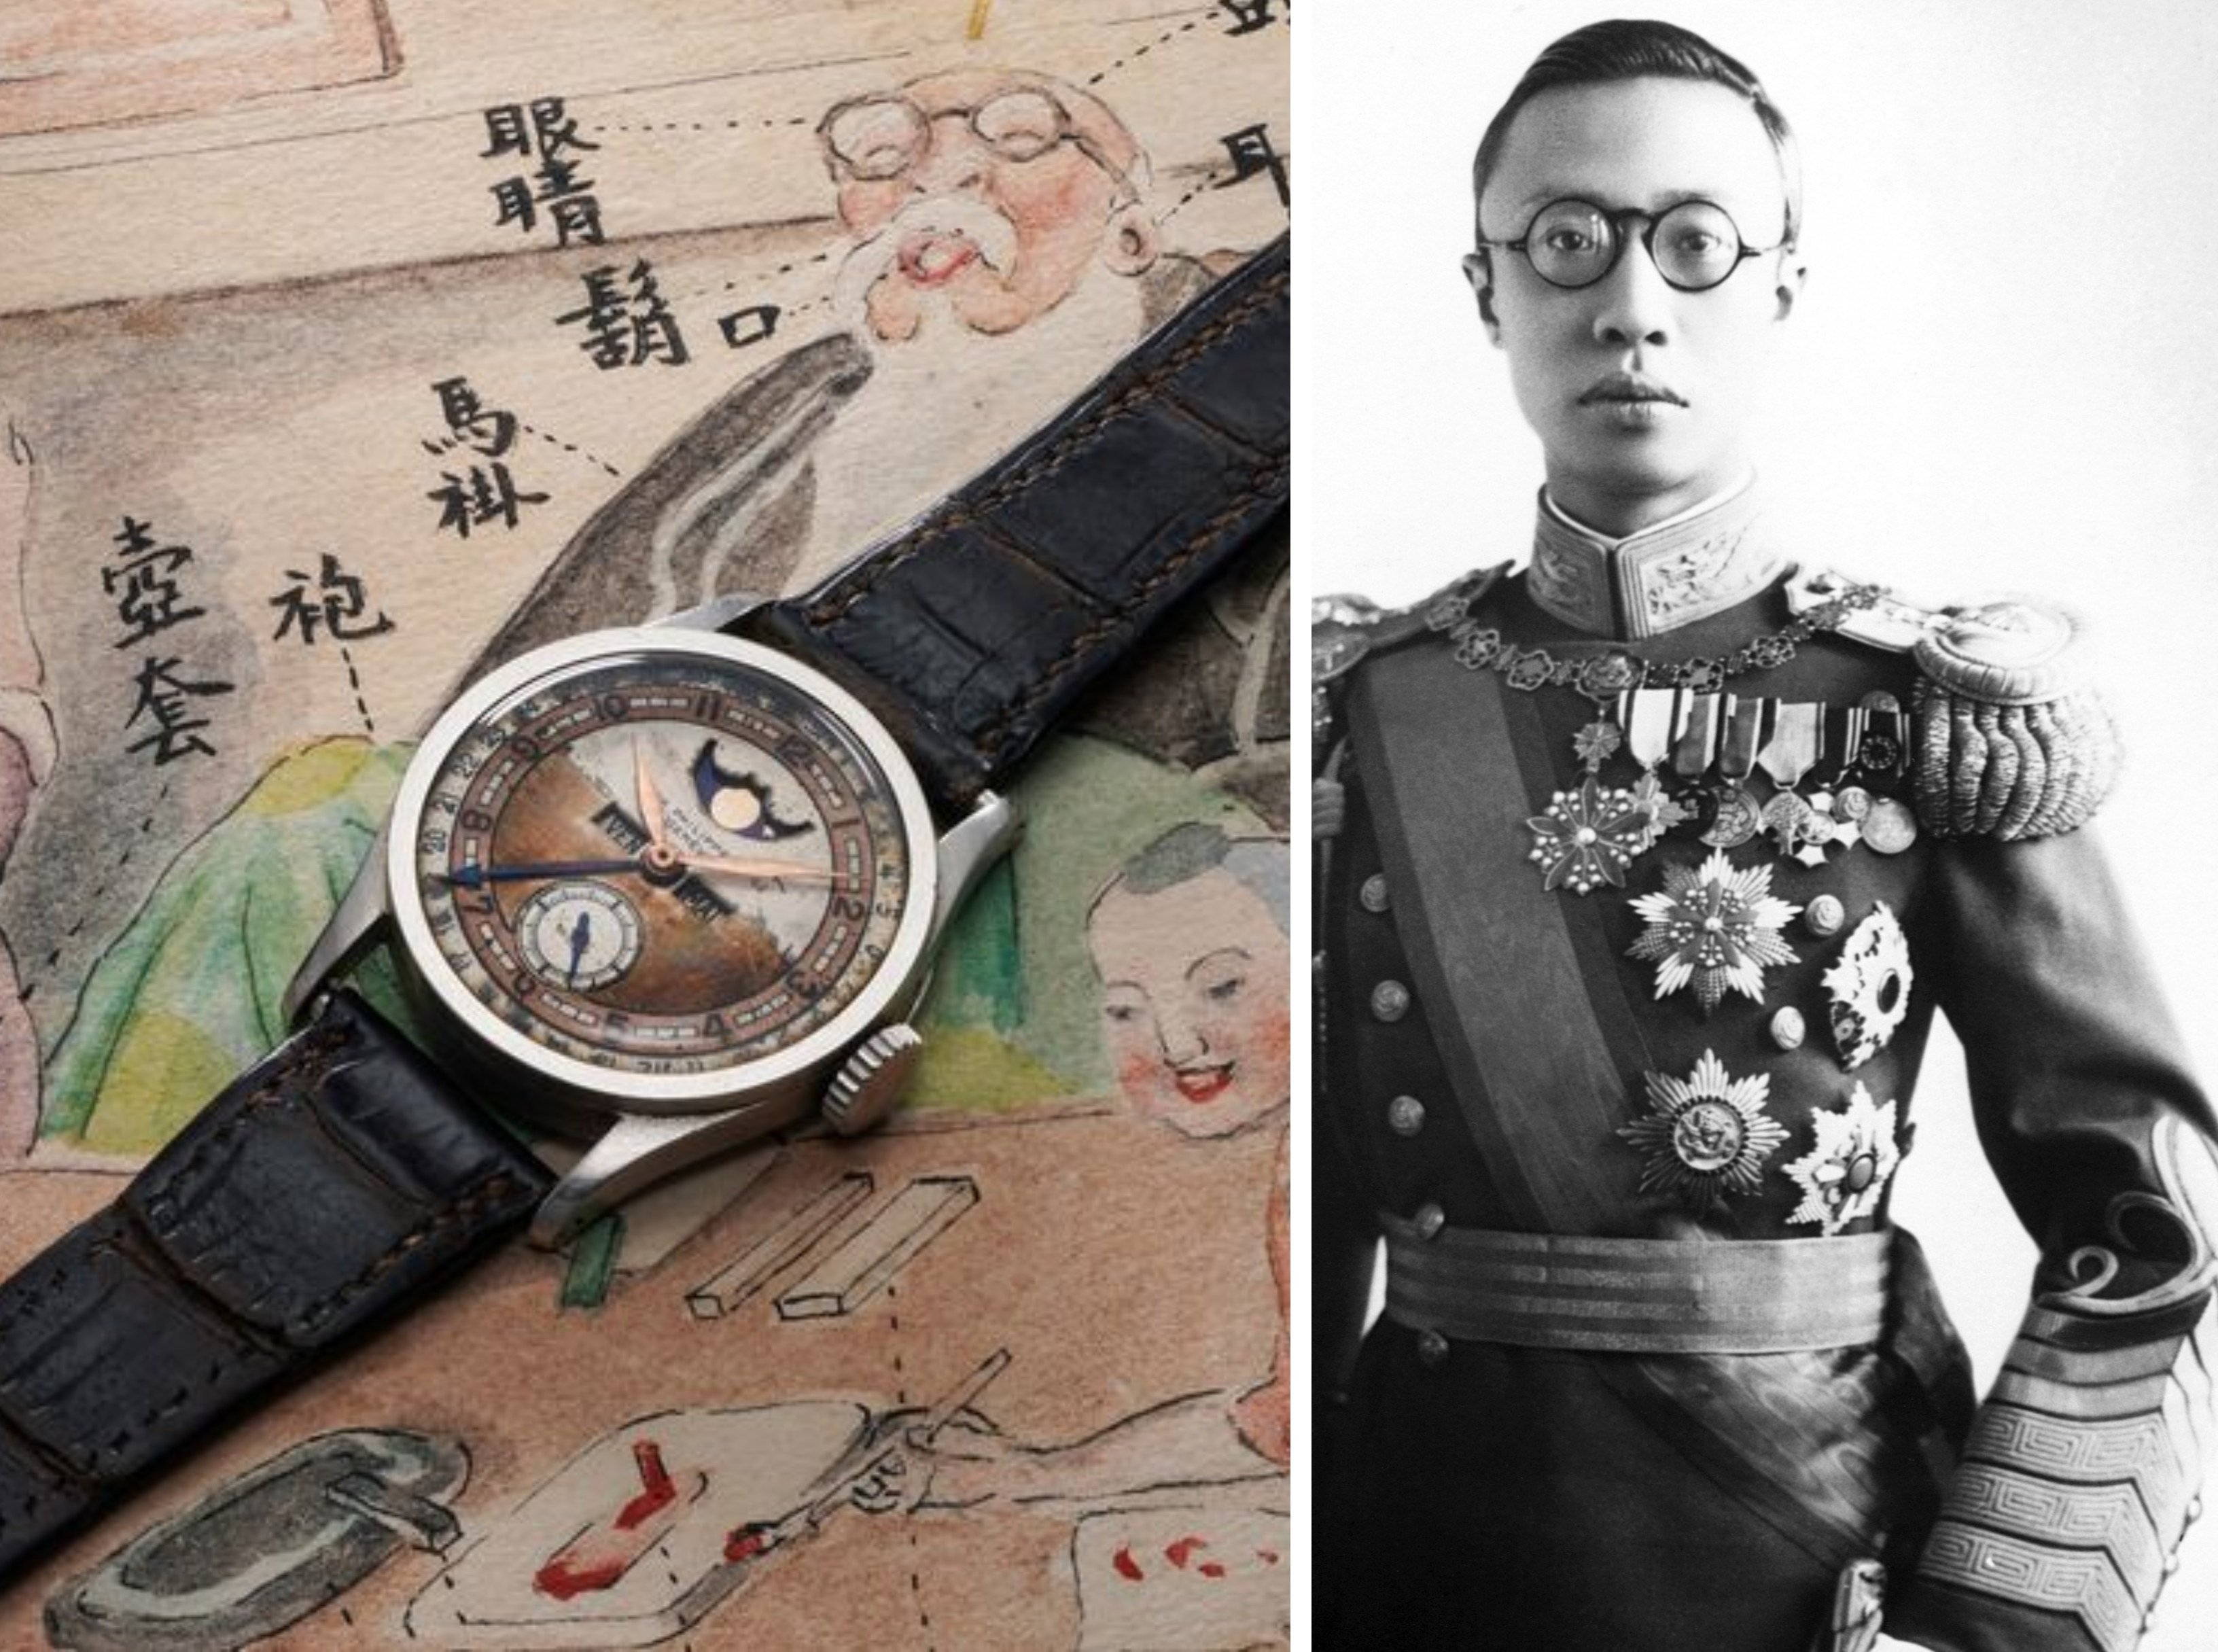 Emperor Puyi of China’s Patek Philippe Ref 96 Quantieme Lune wristwatch has witnessed some key moments in history ... and it’s now up for auction. Photos: Phillips, Getty Images